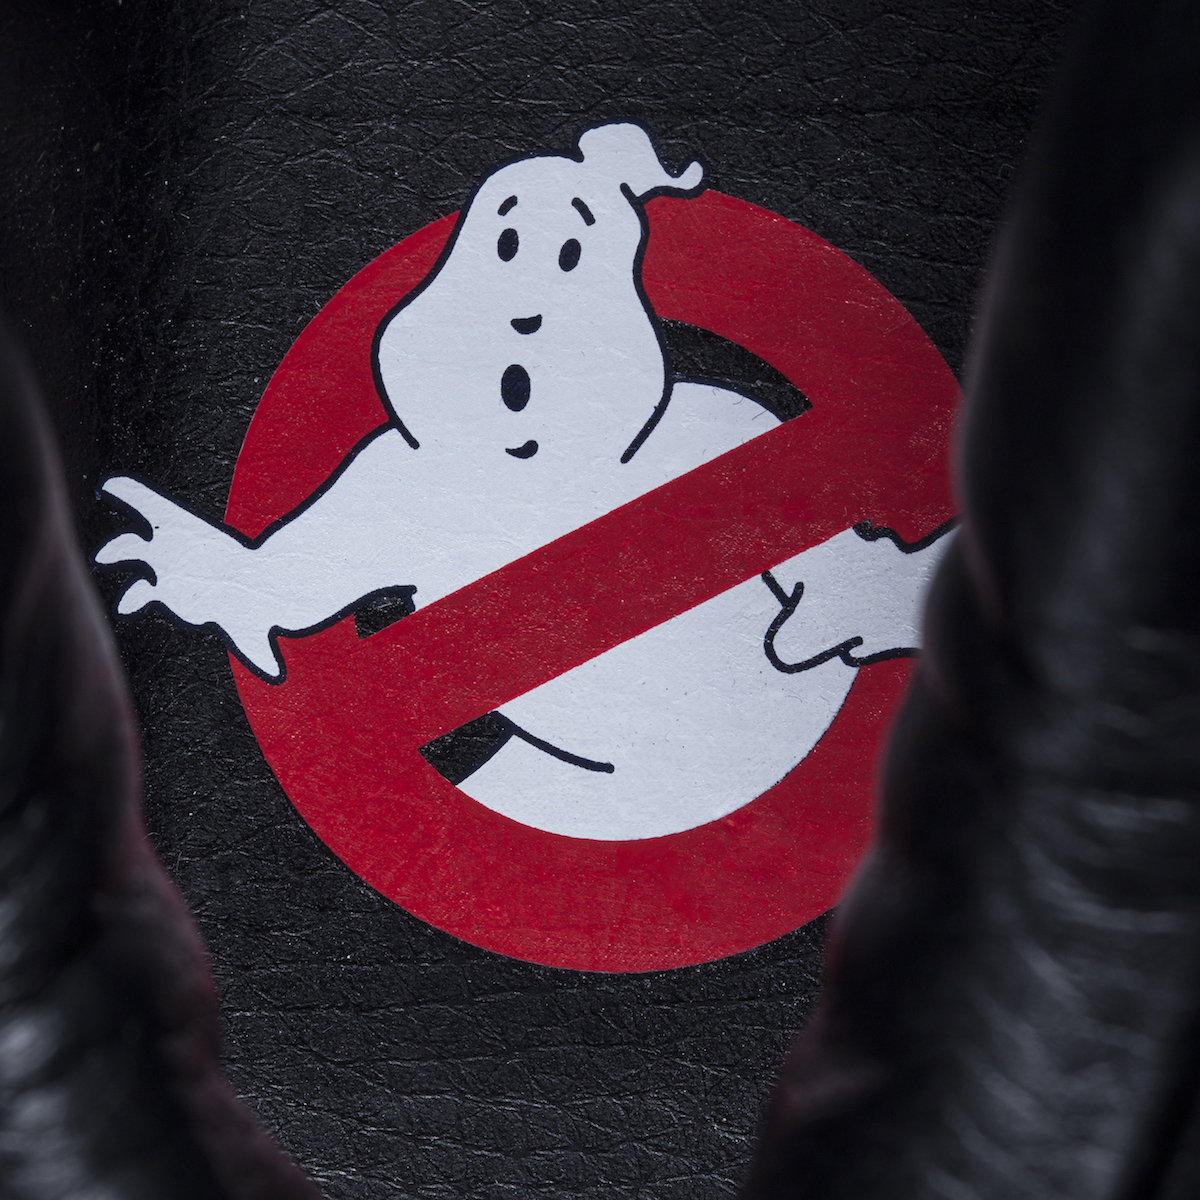 nas x ghostbusters 1